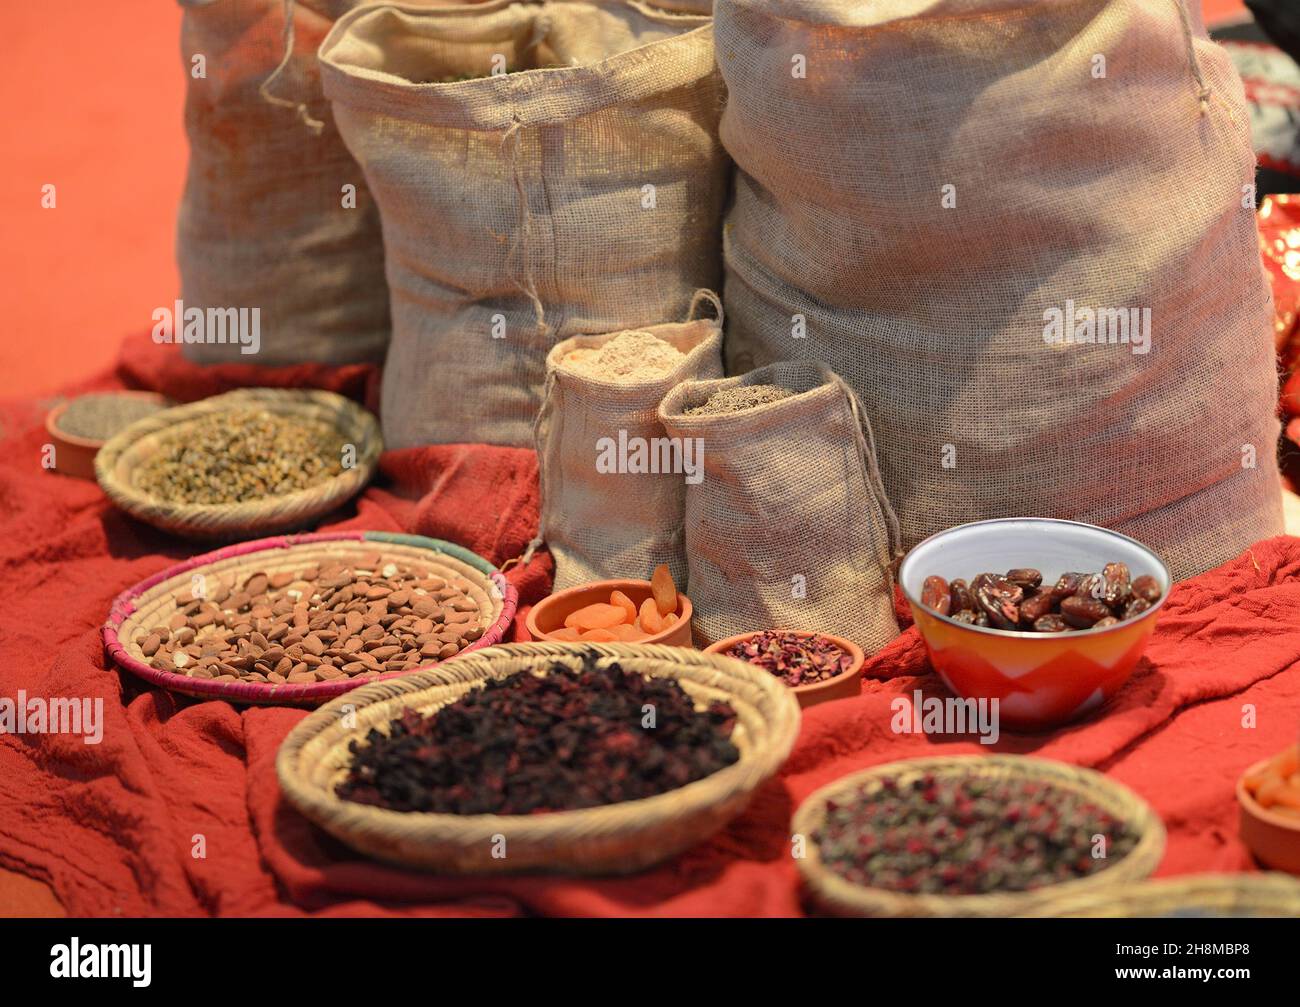 World Travel Market (WTM) at ExCel London, November 2021. Display at the Quatar stand - spices, nuts, fruit and dates Stock Photo